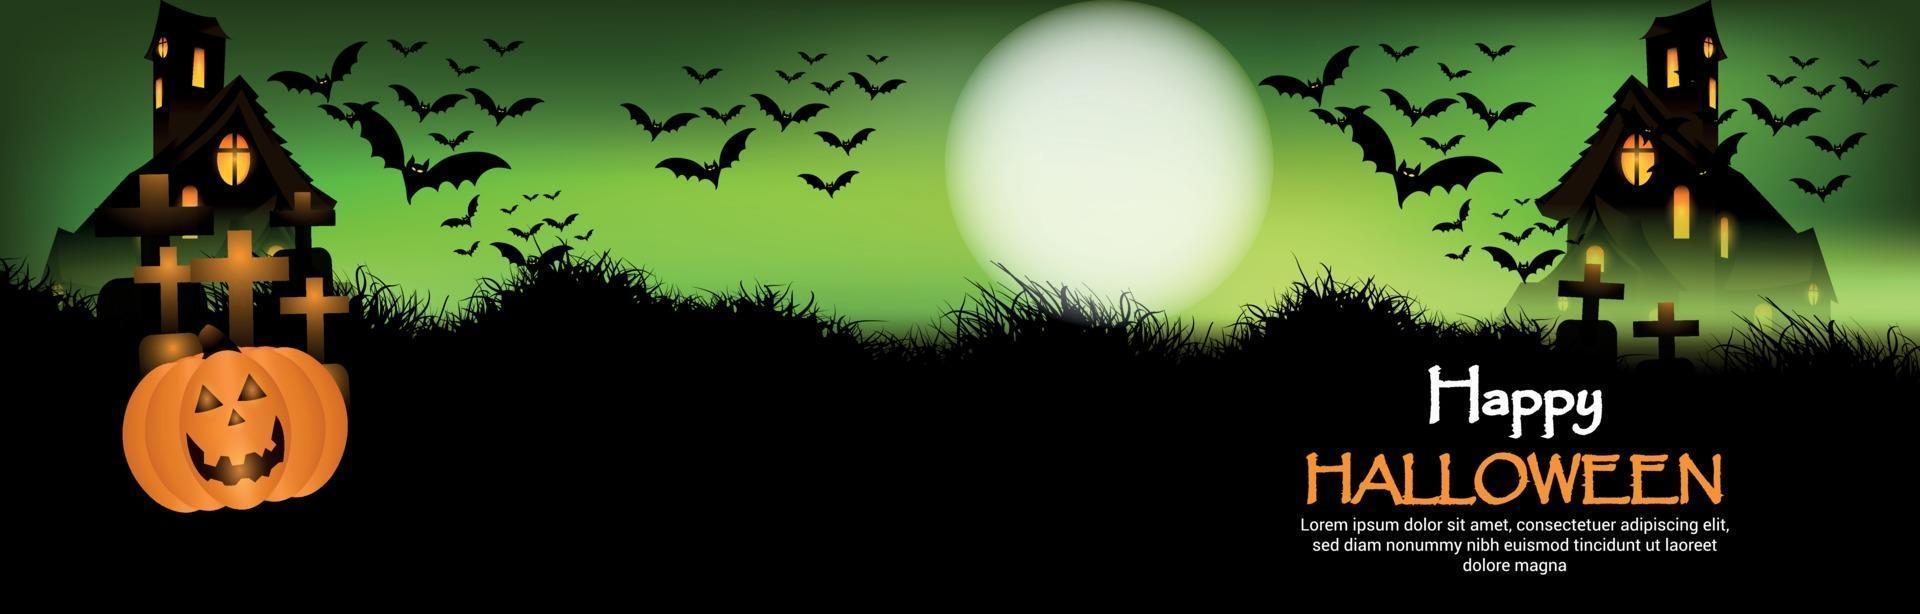 Happy halloween horror night background with hounted house and flying bats vector